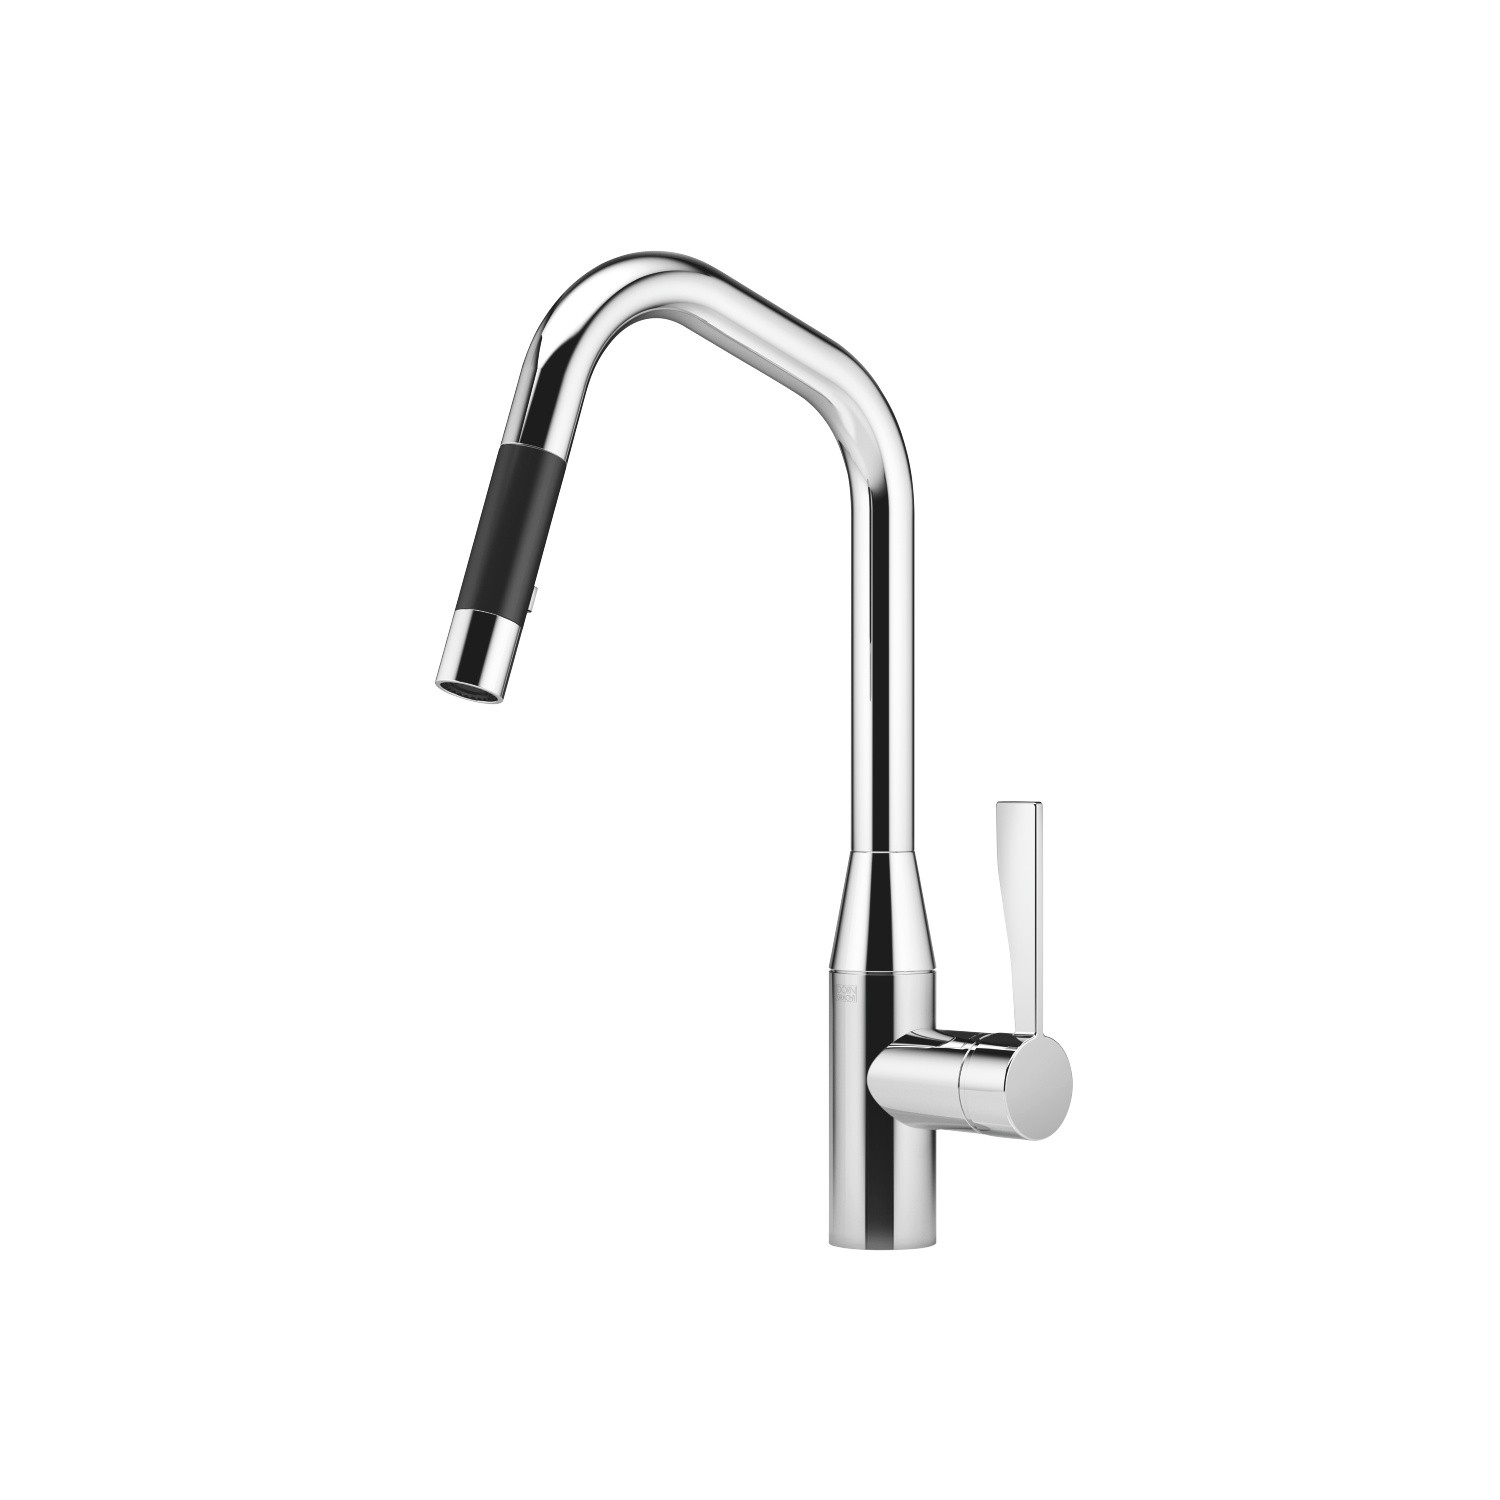 DORNBRACHT 33875895-000010 SYNC SINGLE HOLE DECK MOUNT PULL DOWN KITCHEN FAUCET WITH SPRAY FUNCTION AND LEVER HANDLE